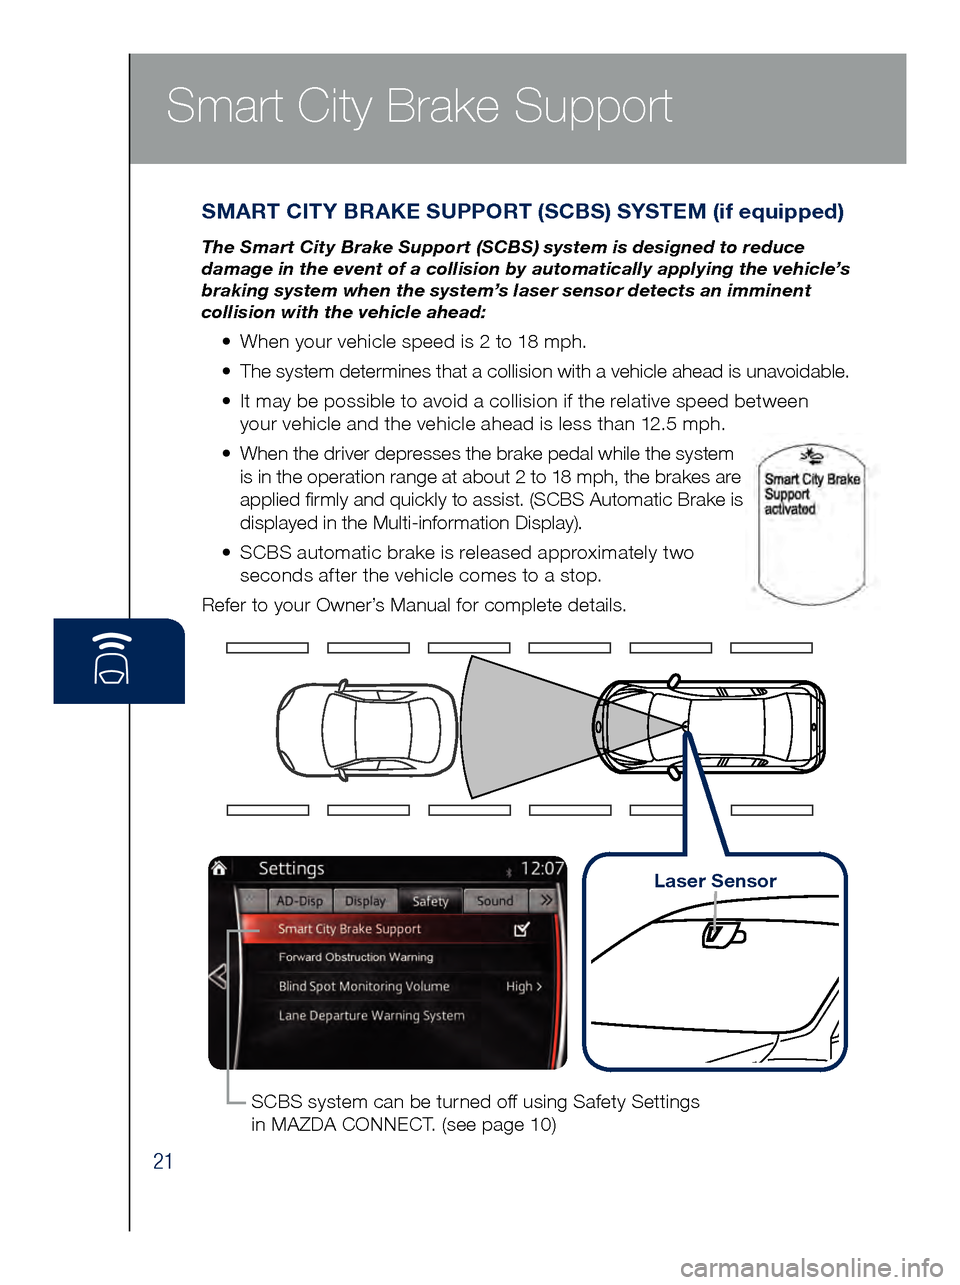 MAZDA MODEL 6 2017  Quick Start Guide (in English) 21
Smart City Brake Support
SMART CITY BRAKE SUPPORT (SCBS) SYSTEM (if equipped)
The Smart City Brake Support (SCBS) system is designed to reduce 
damage in the event of a collision by automatically a